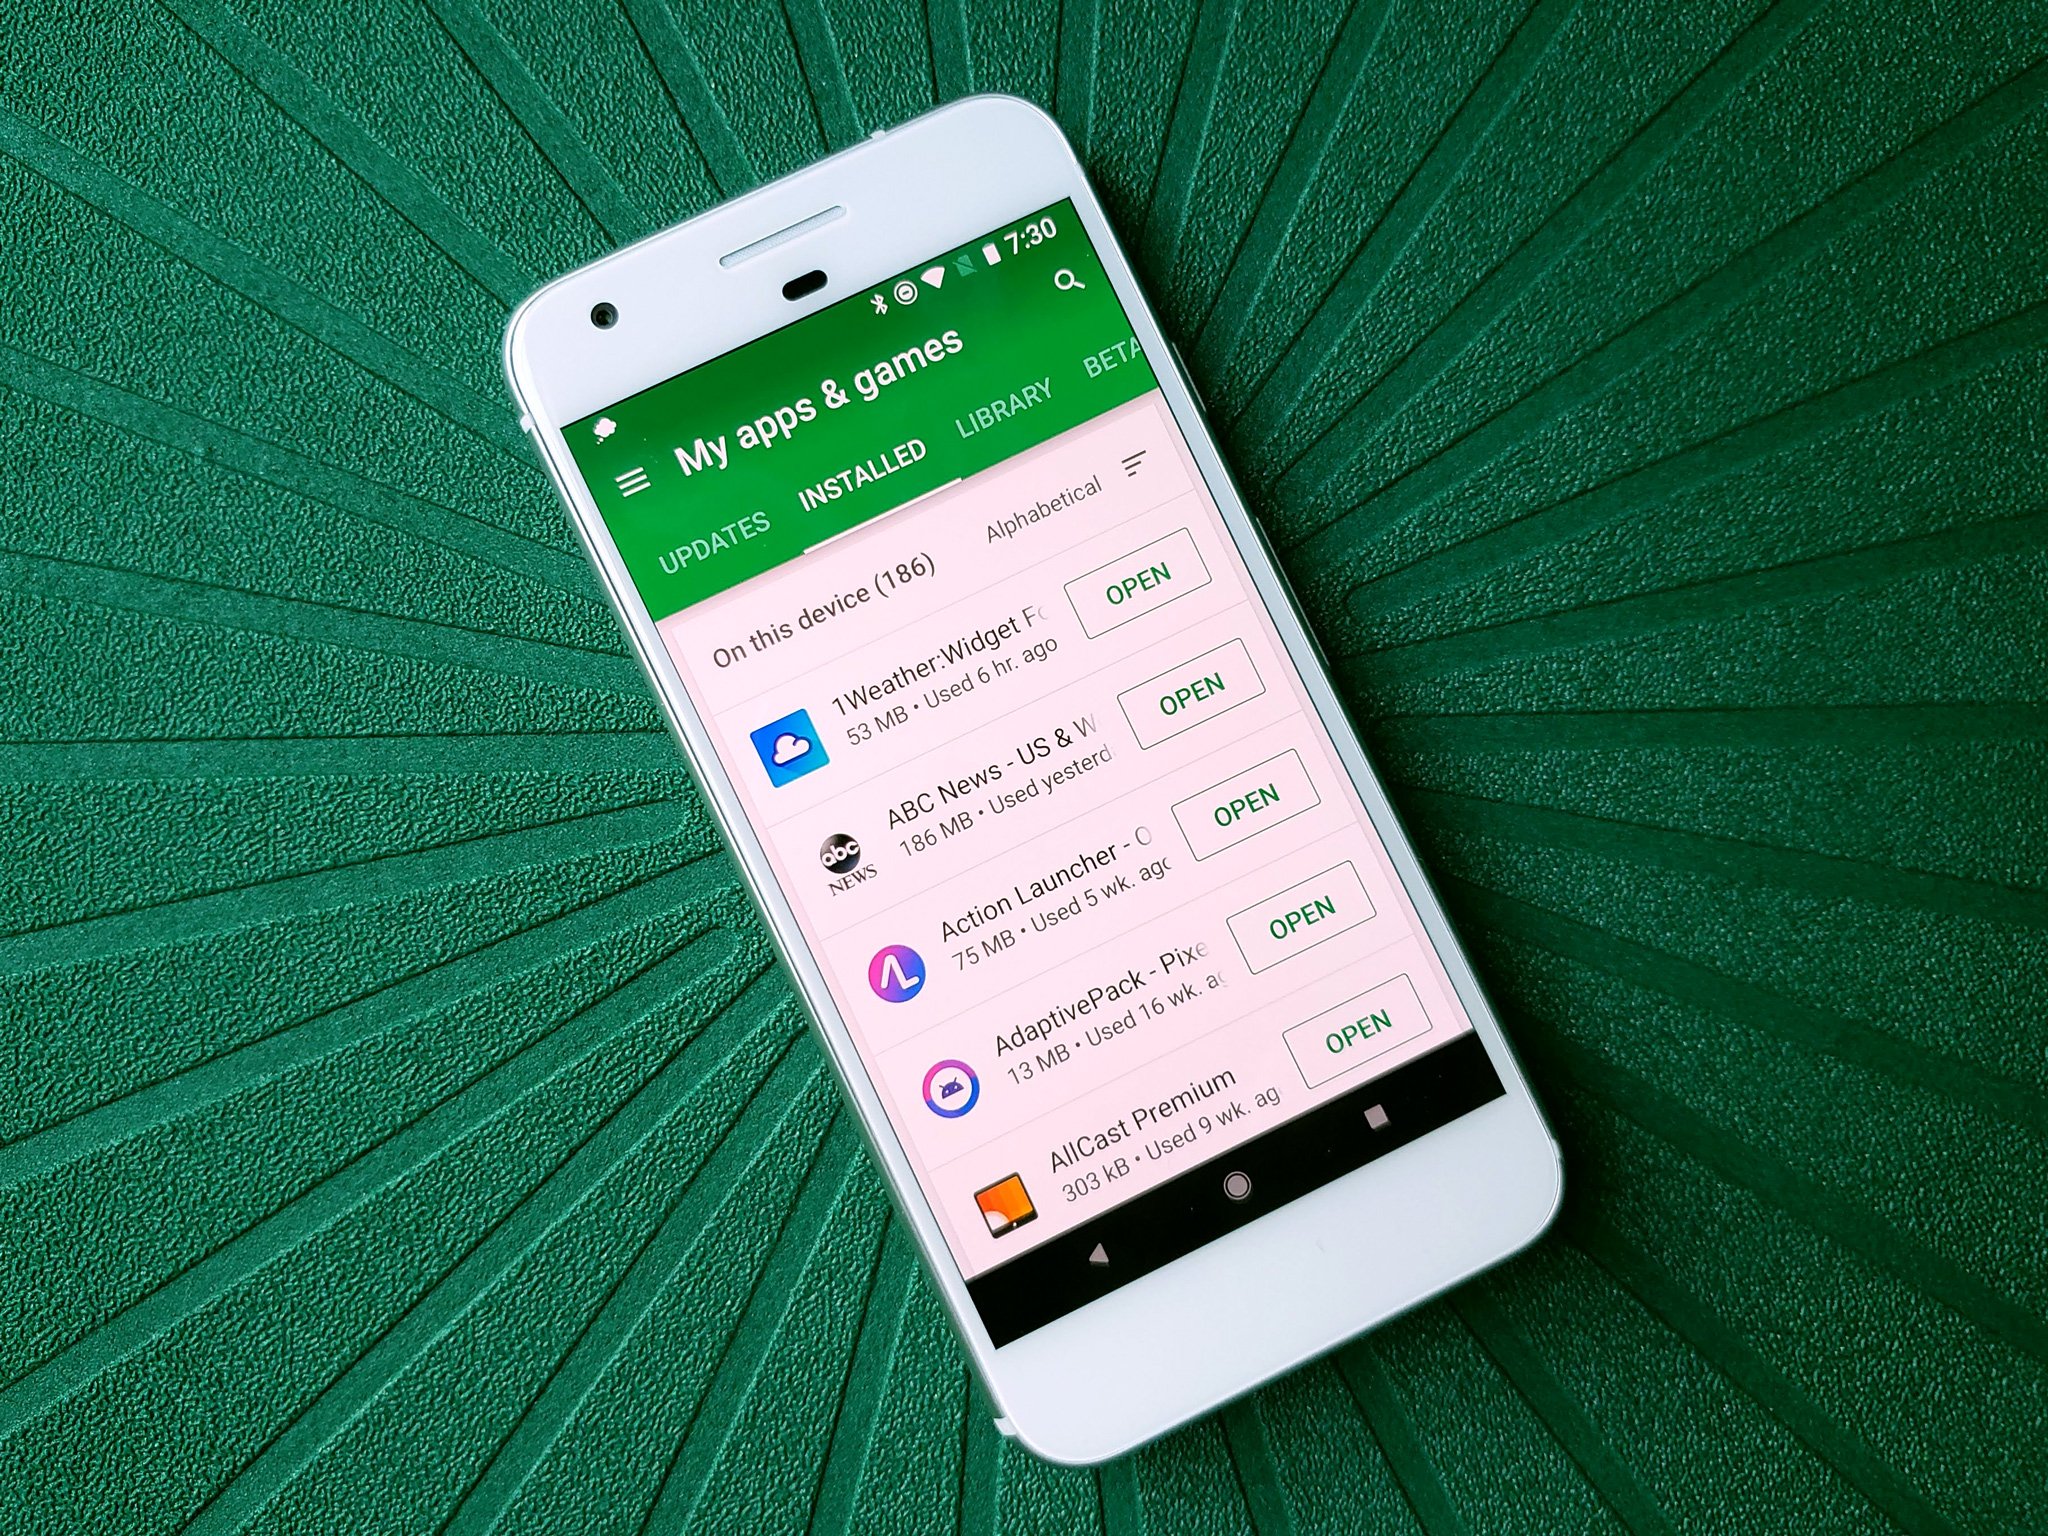 How to download, update, and manage apps from the Google Play Store